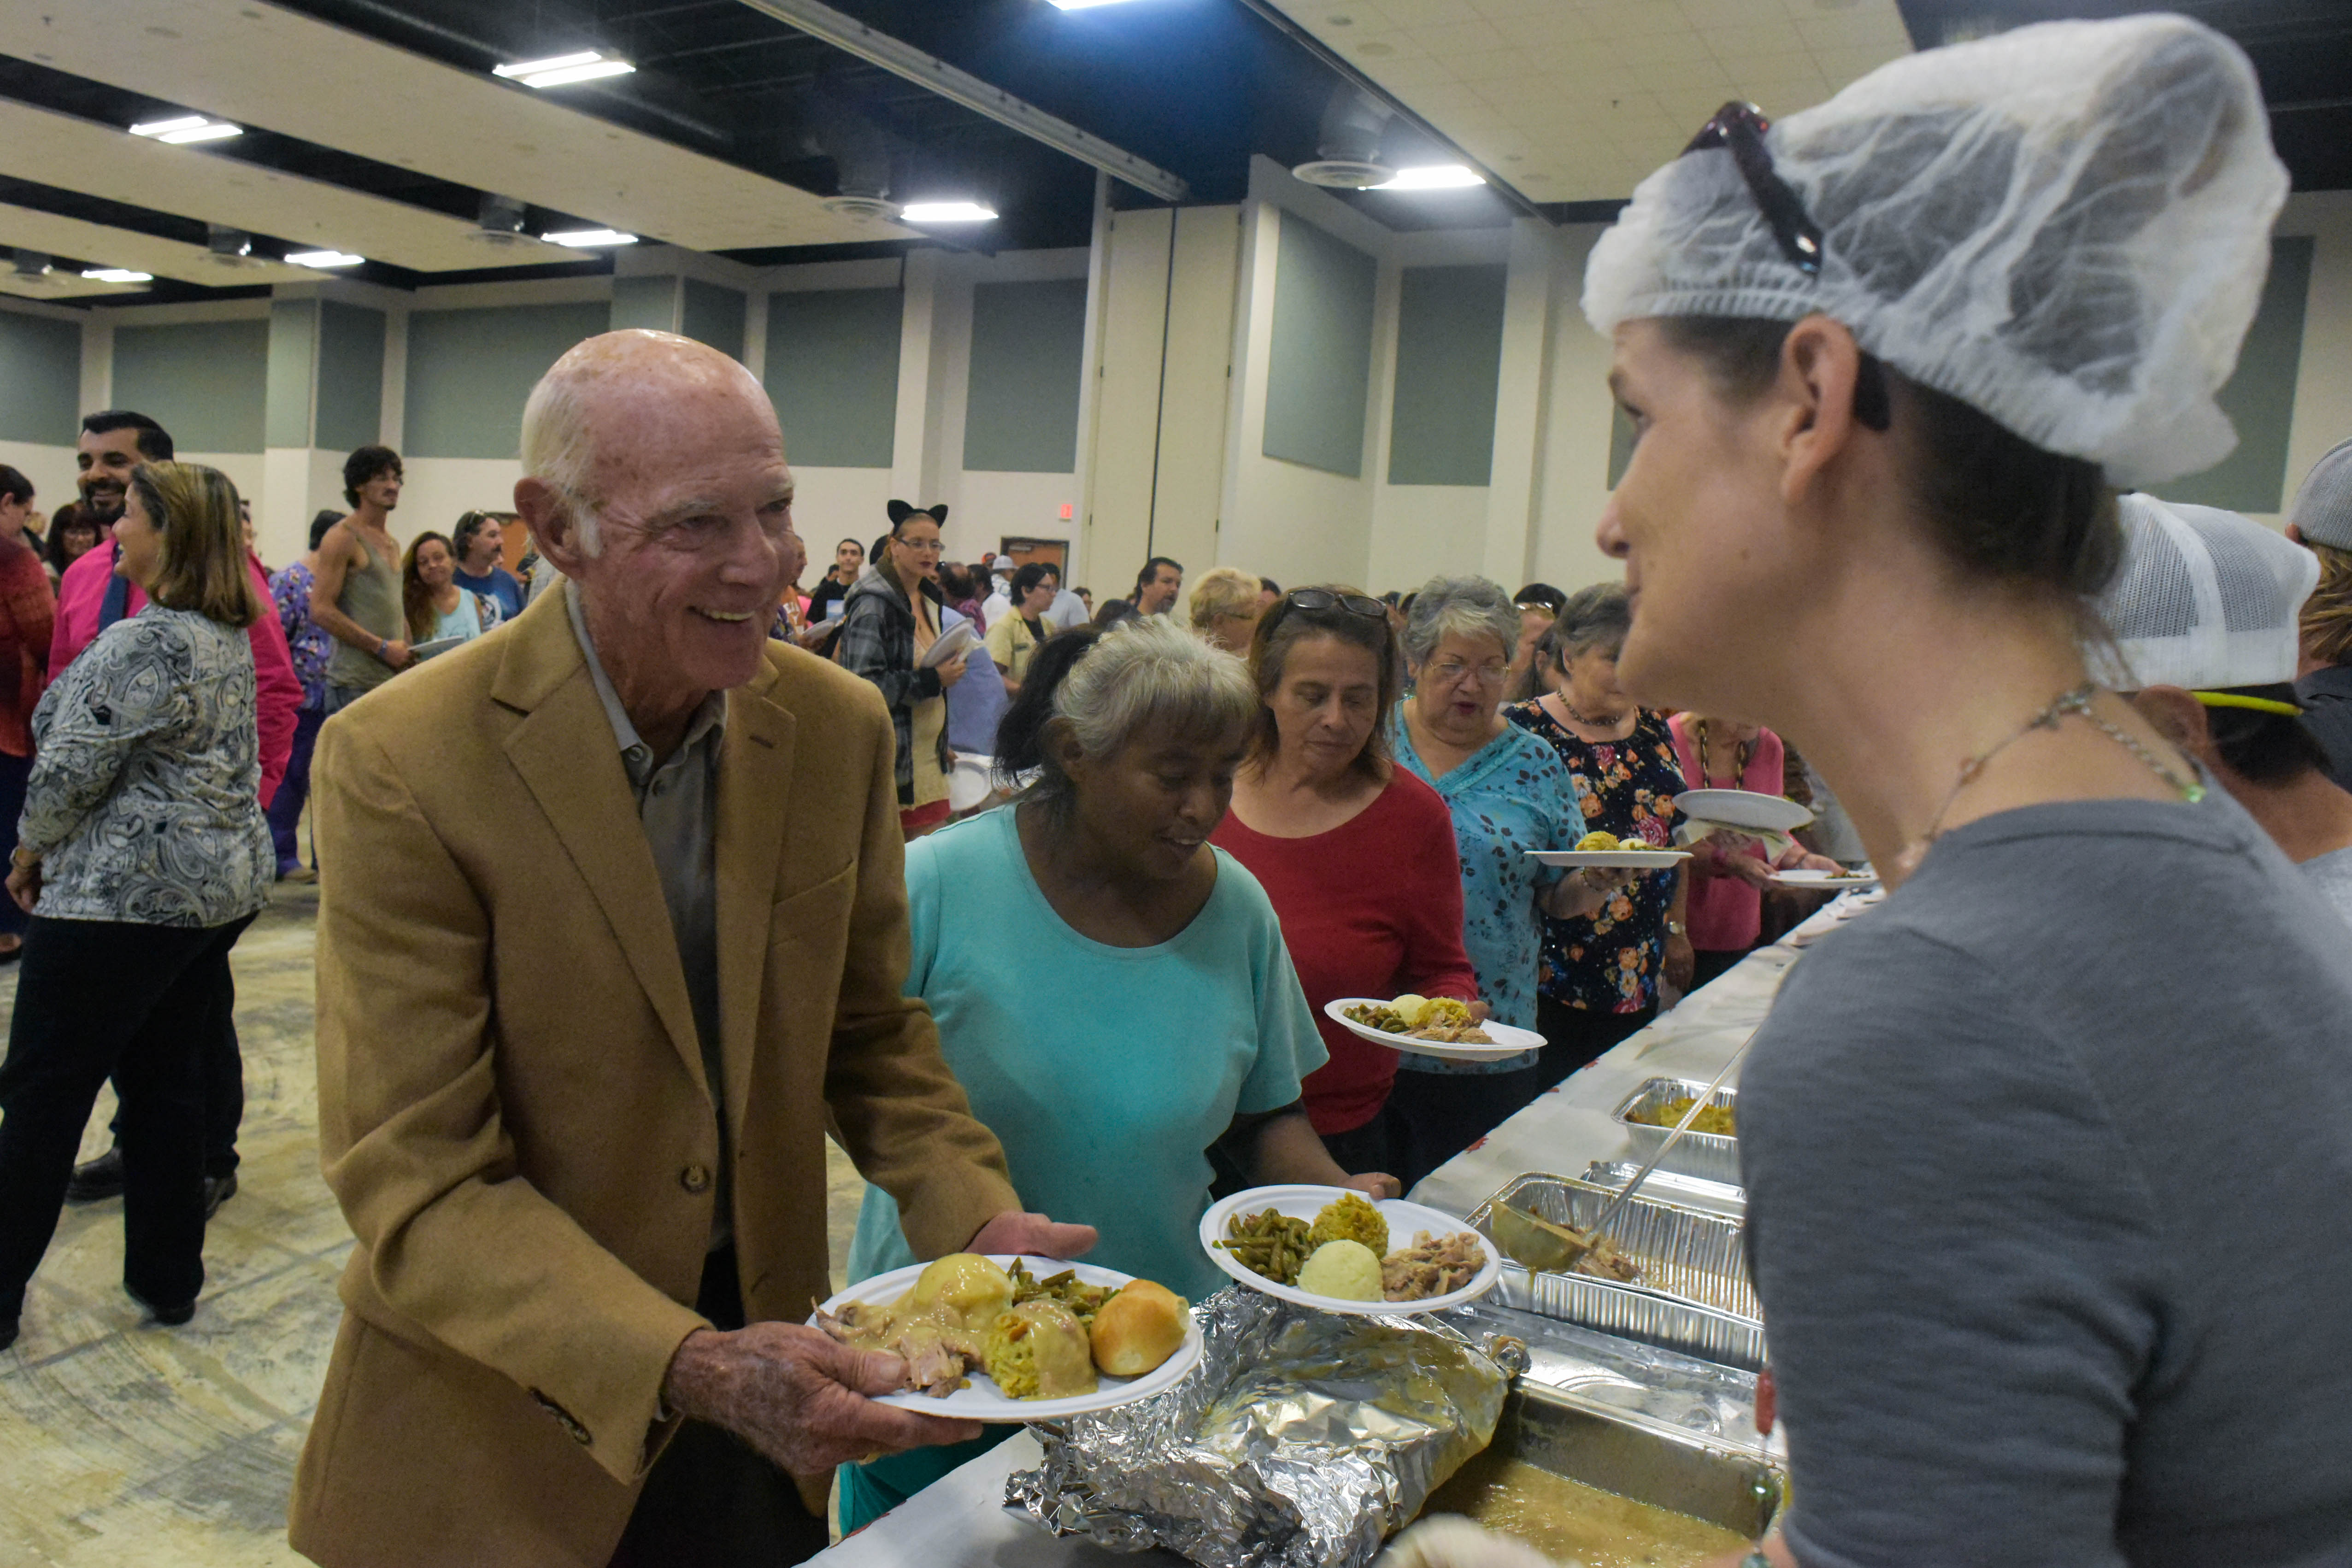 Fall Feast in a giving community